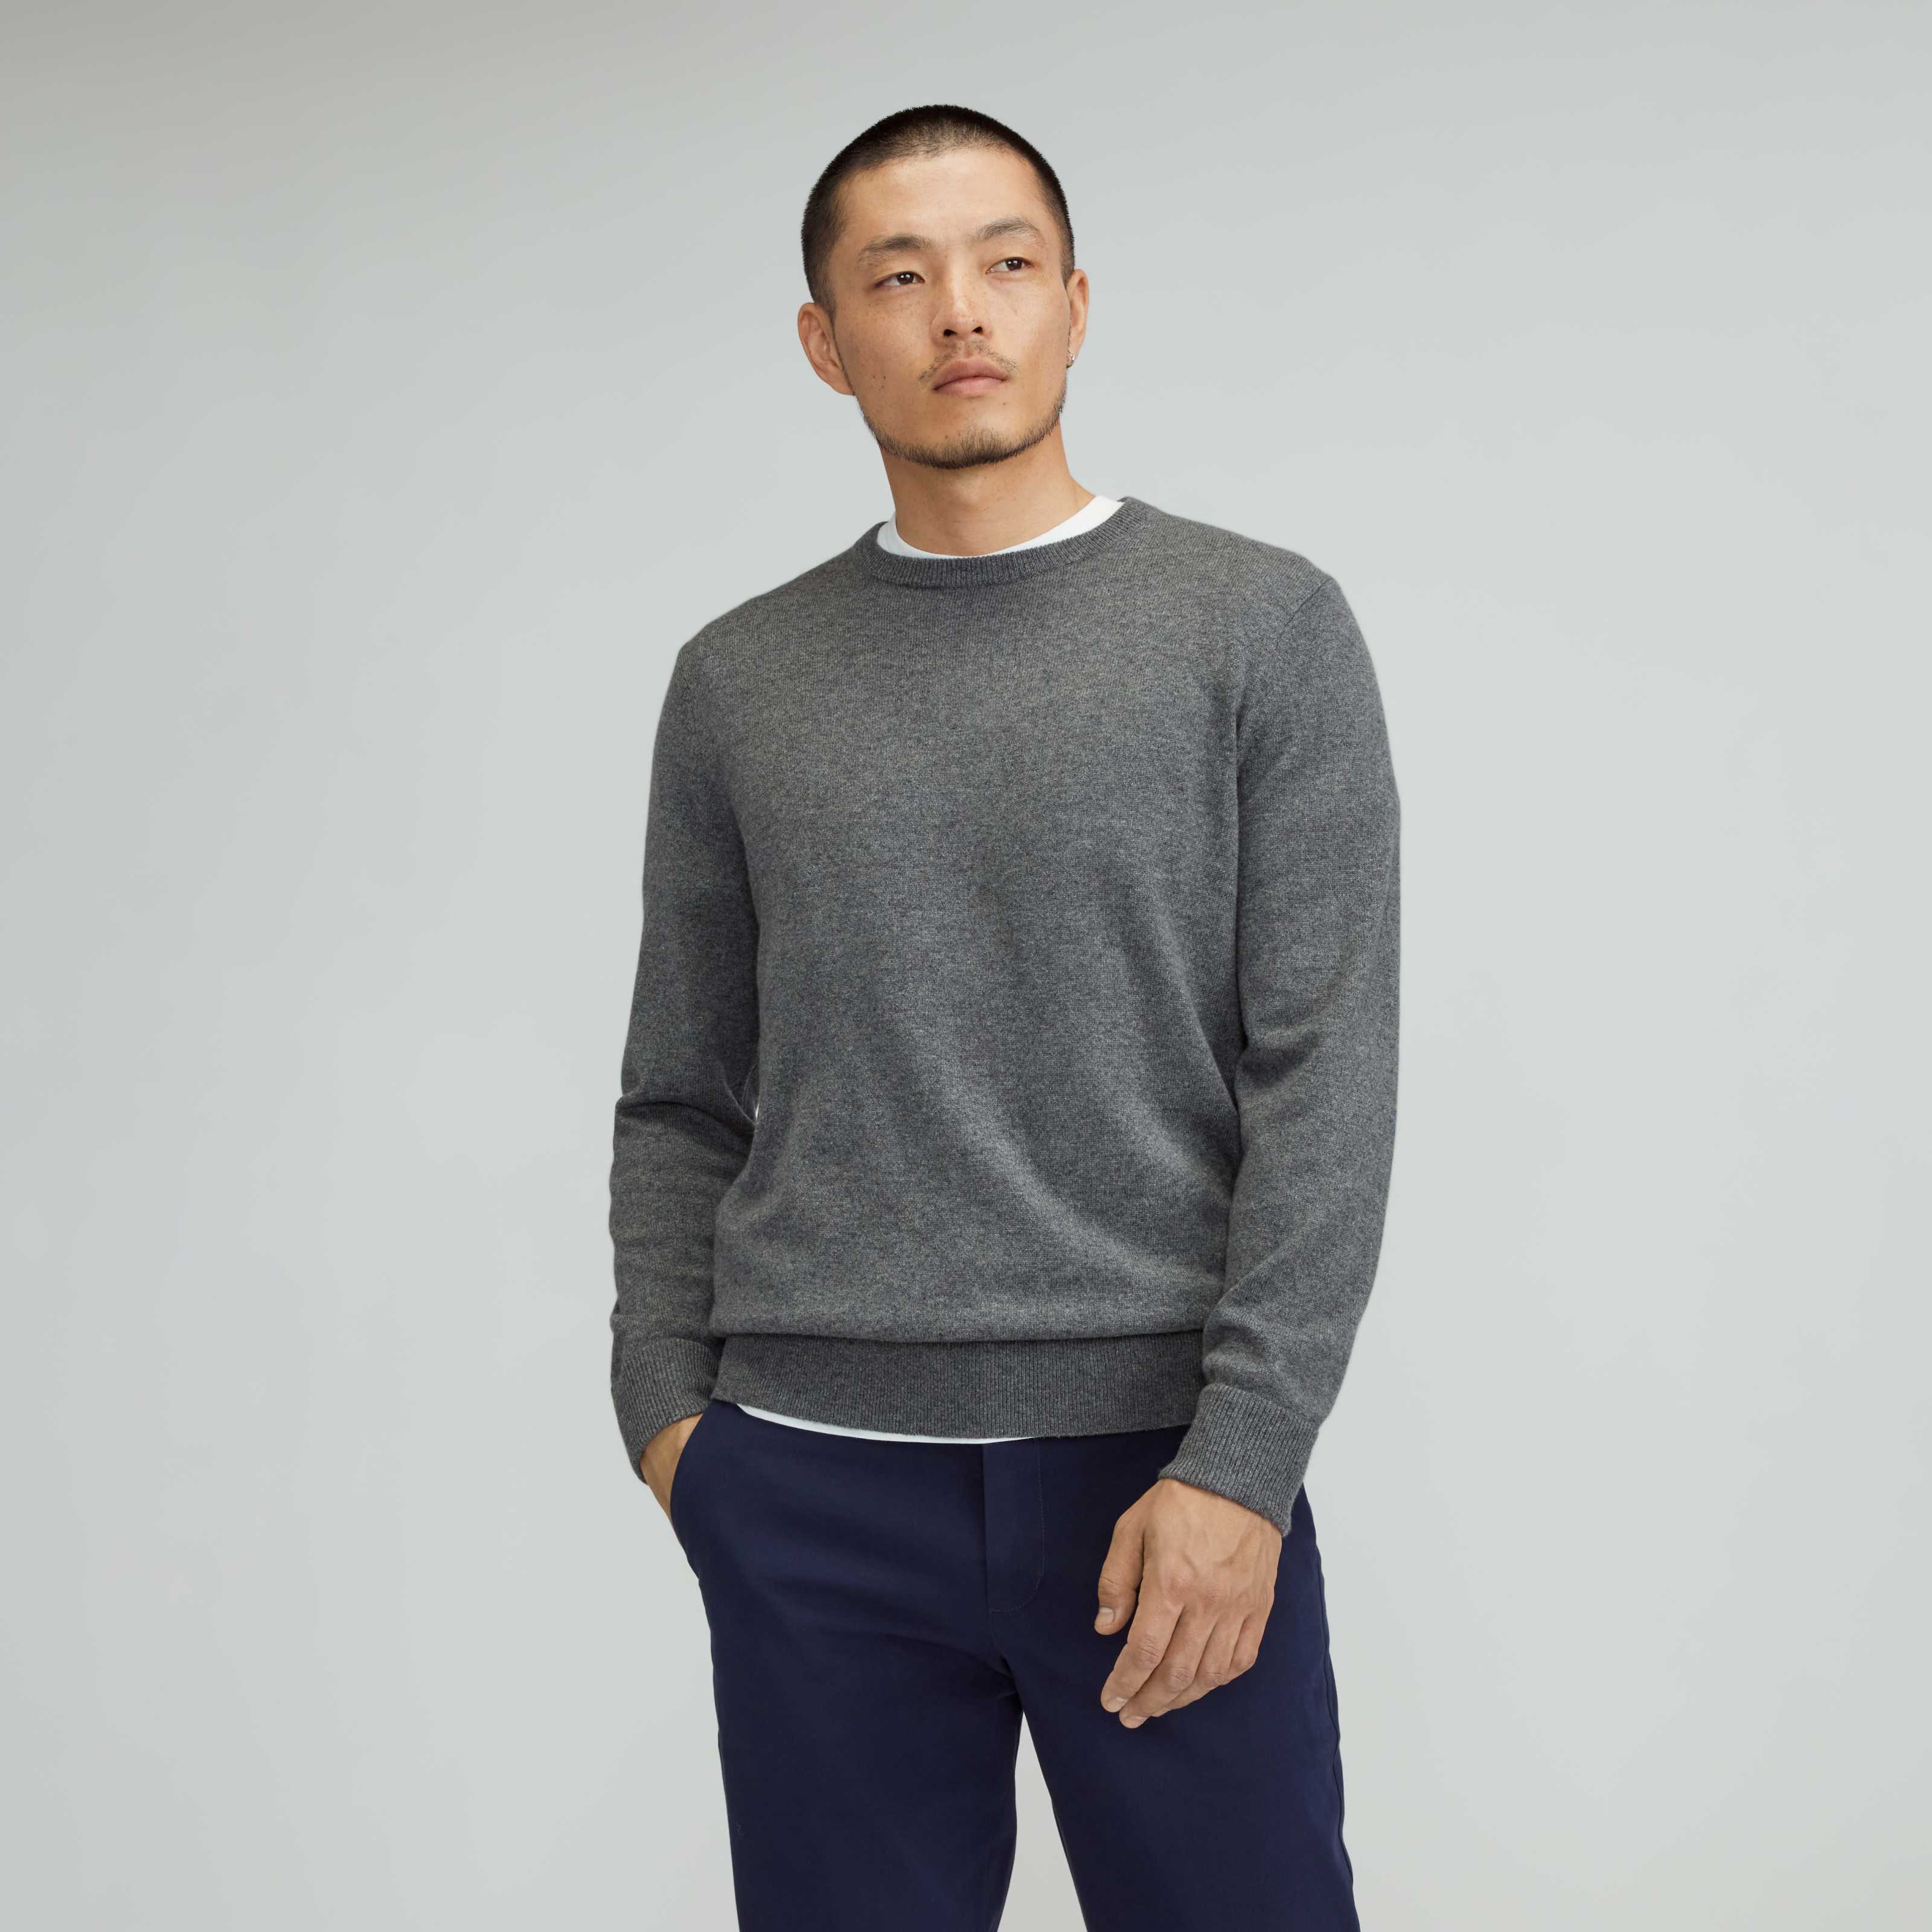 Men's Grade-A Cashmere Crew Sweater by Everlane in Charcoal, Size M